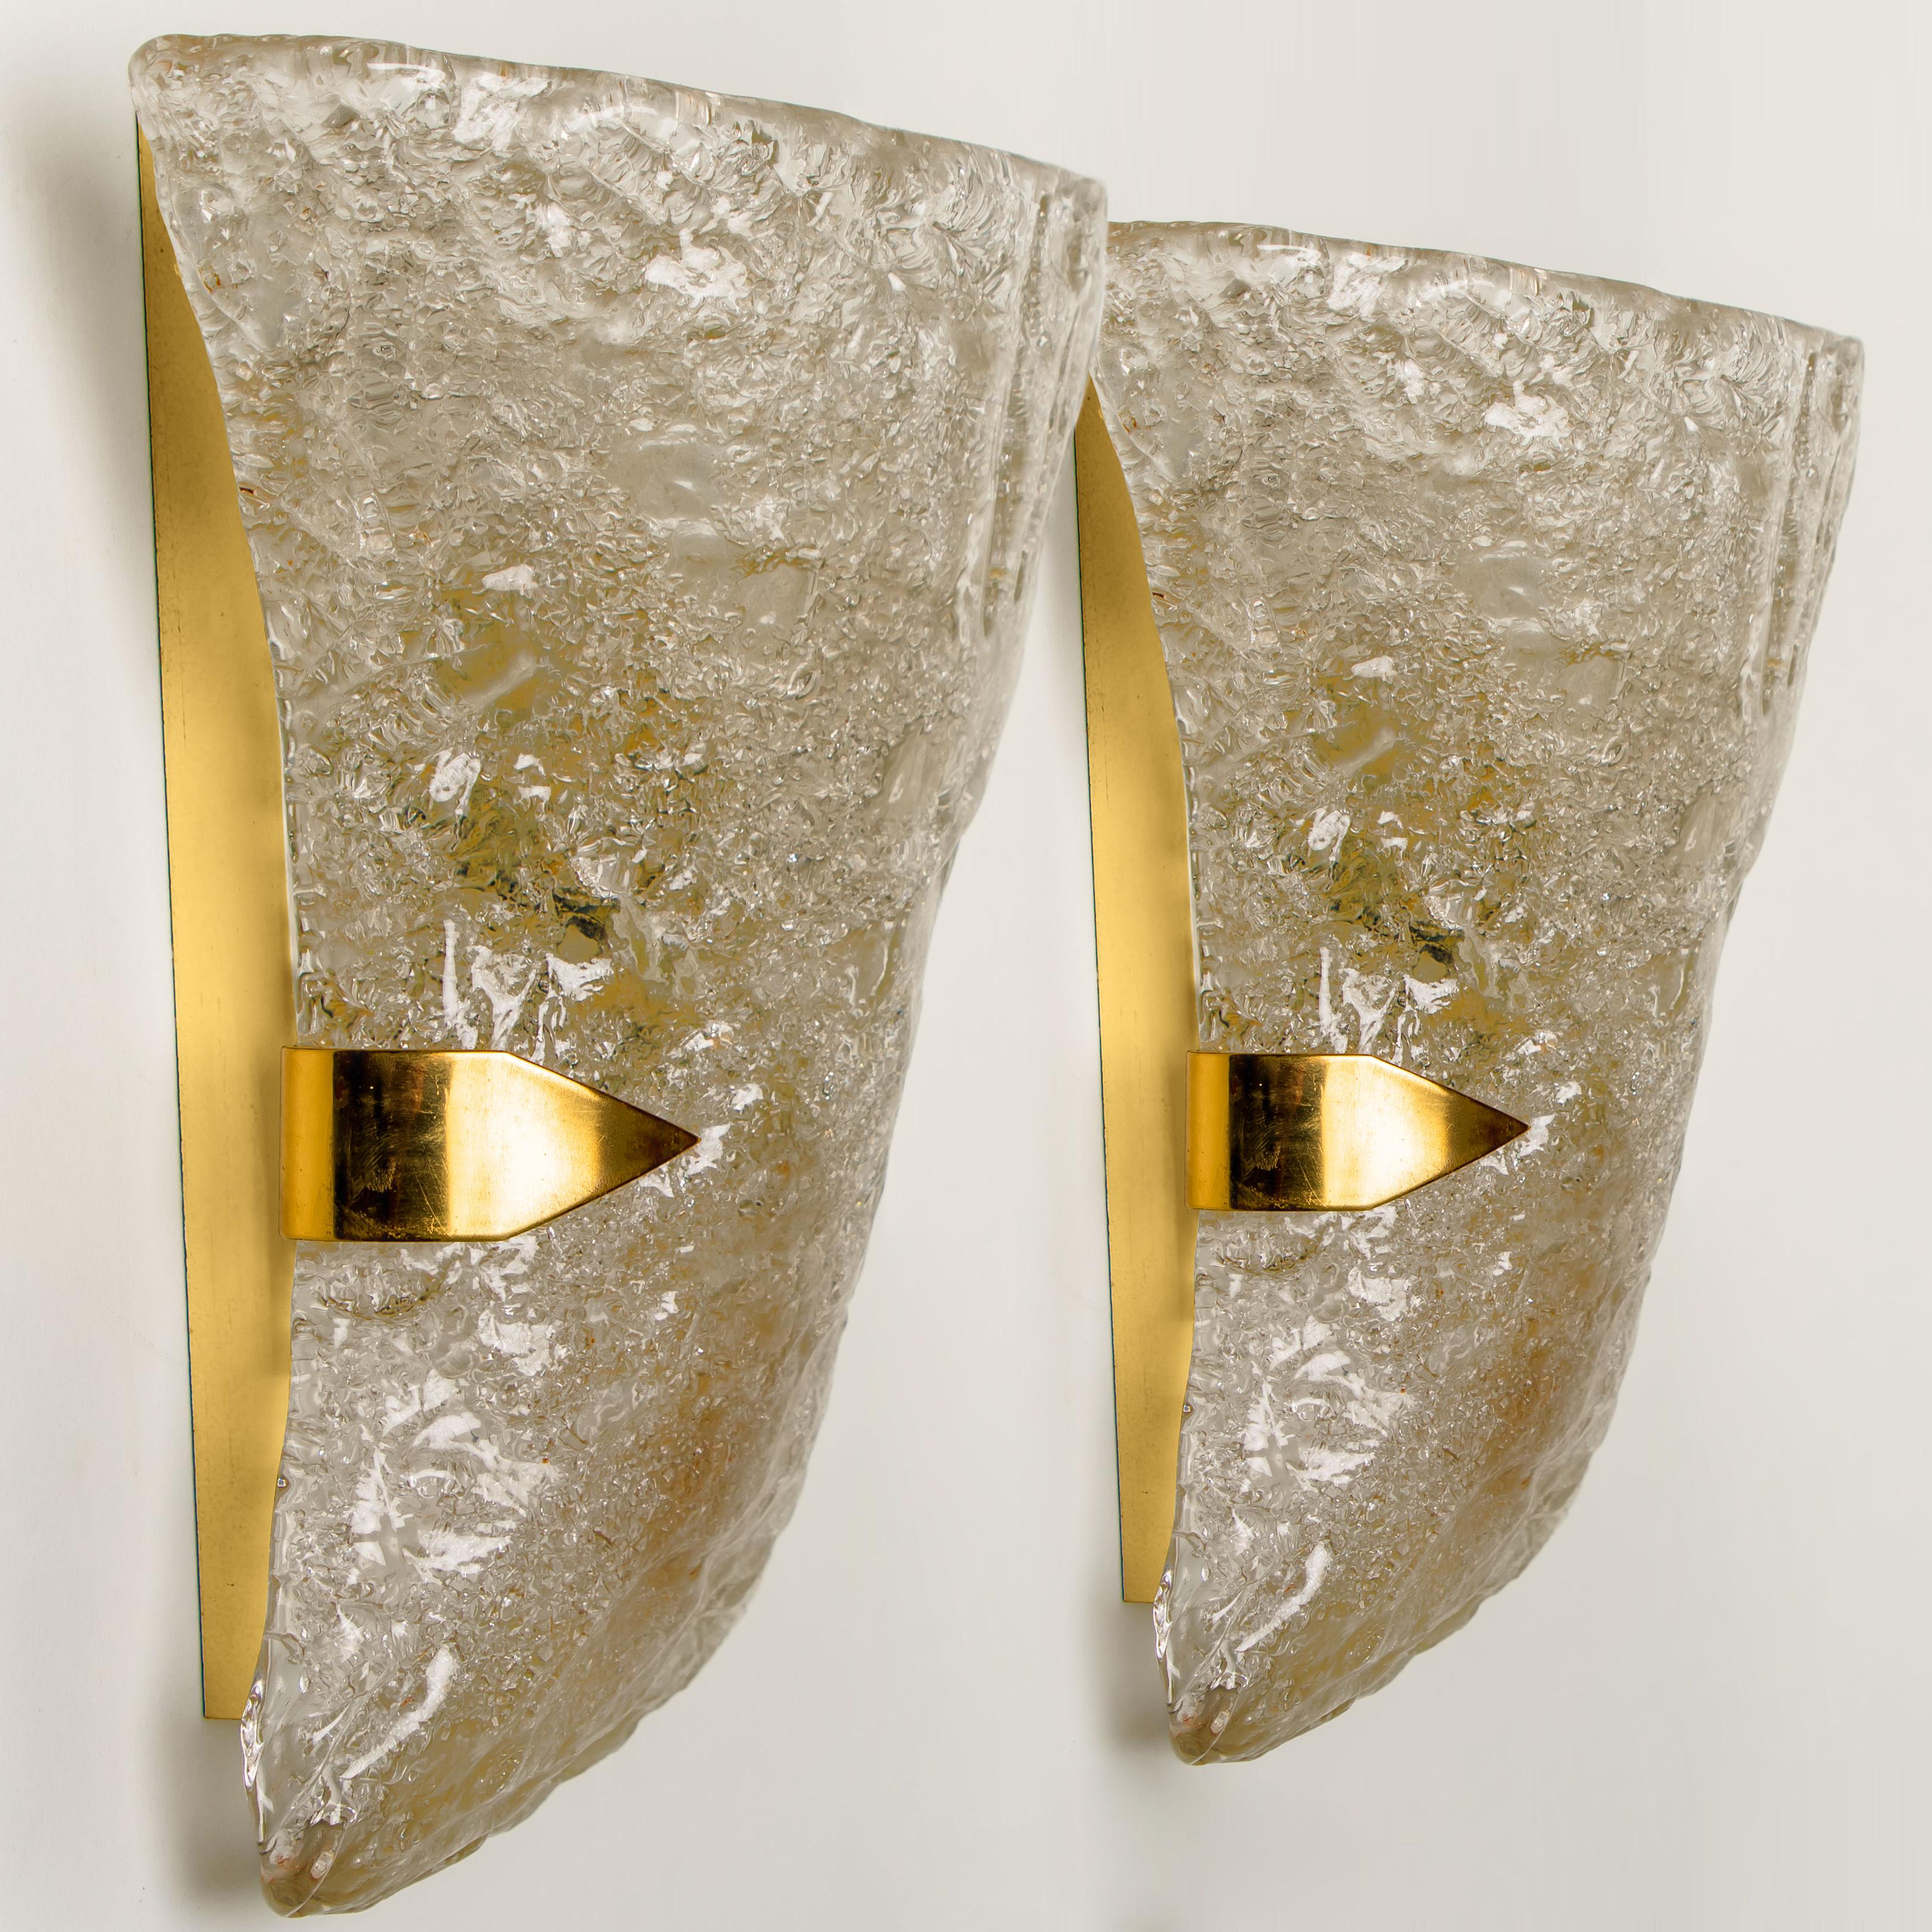 Beautiful diabolo shaped wall lights by Hillebrand. Manufactured in midcentury, circa 1970 (late 1960s or early 1970s).
Wonderful light effect due to lovely glass elements

In very good vintage condition. Each light requires 2X E14 light bulbs up